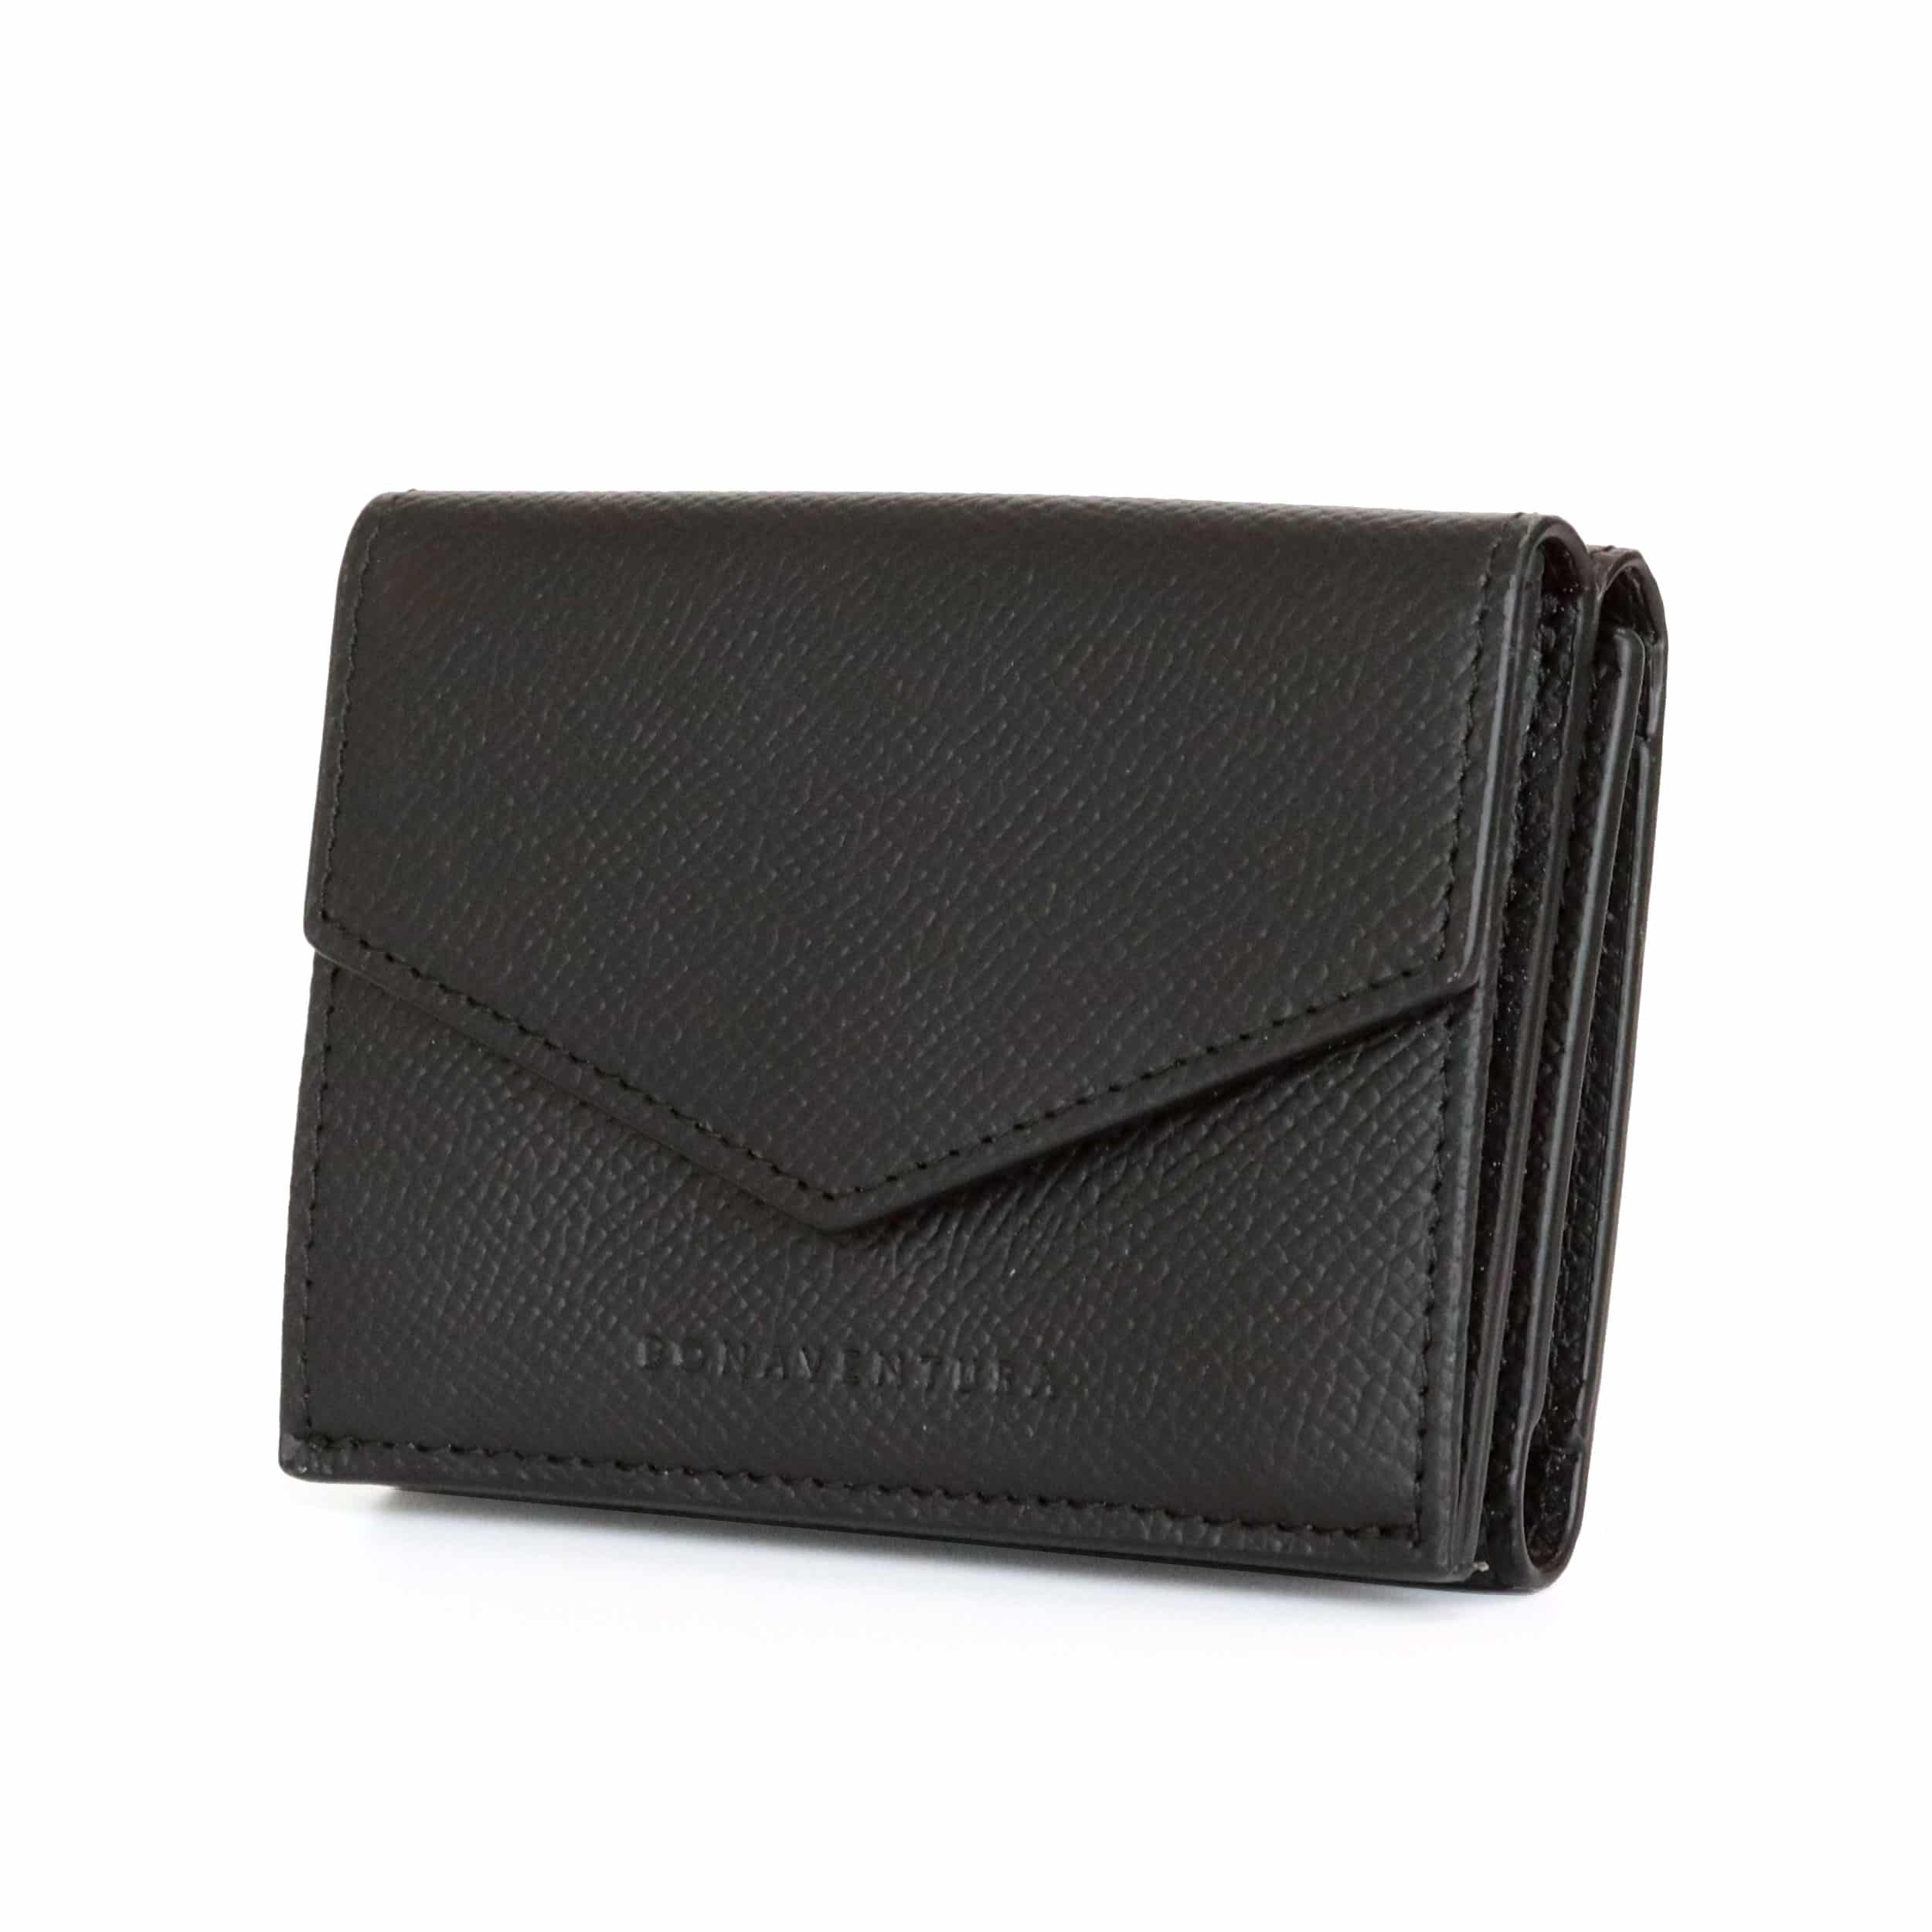 Small wallet in Noblesse leather